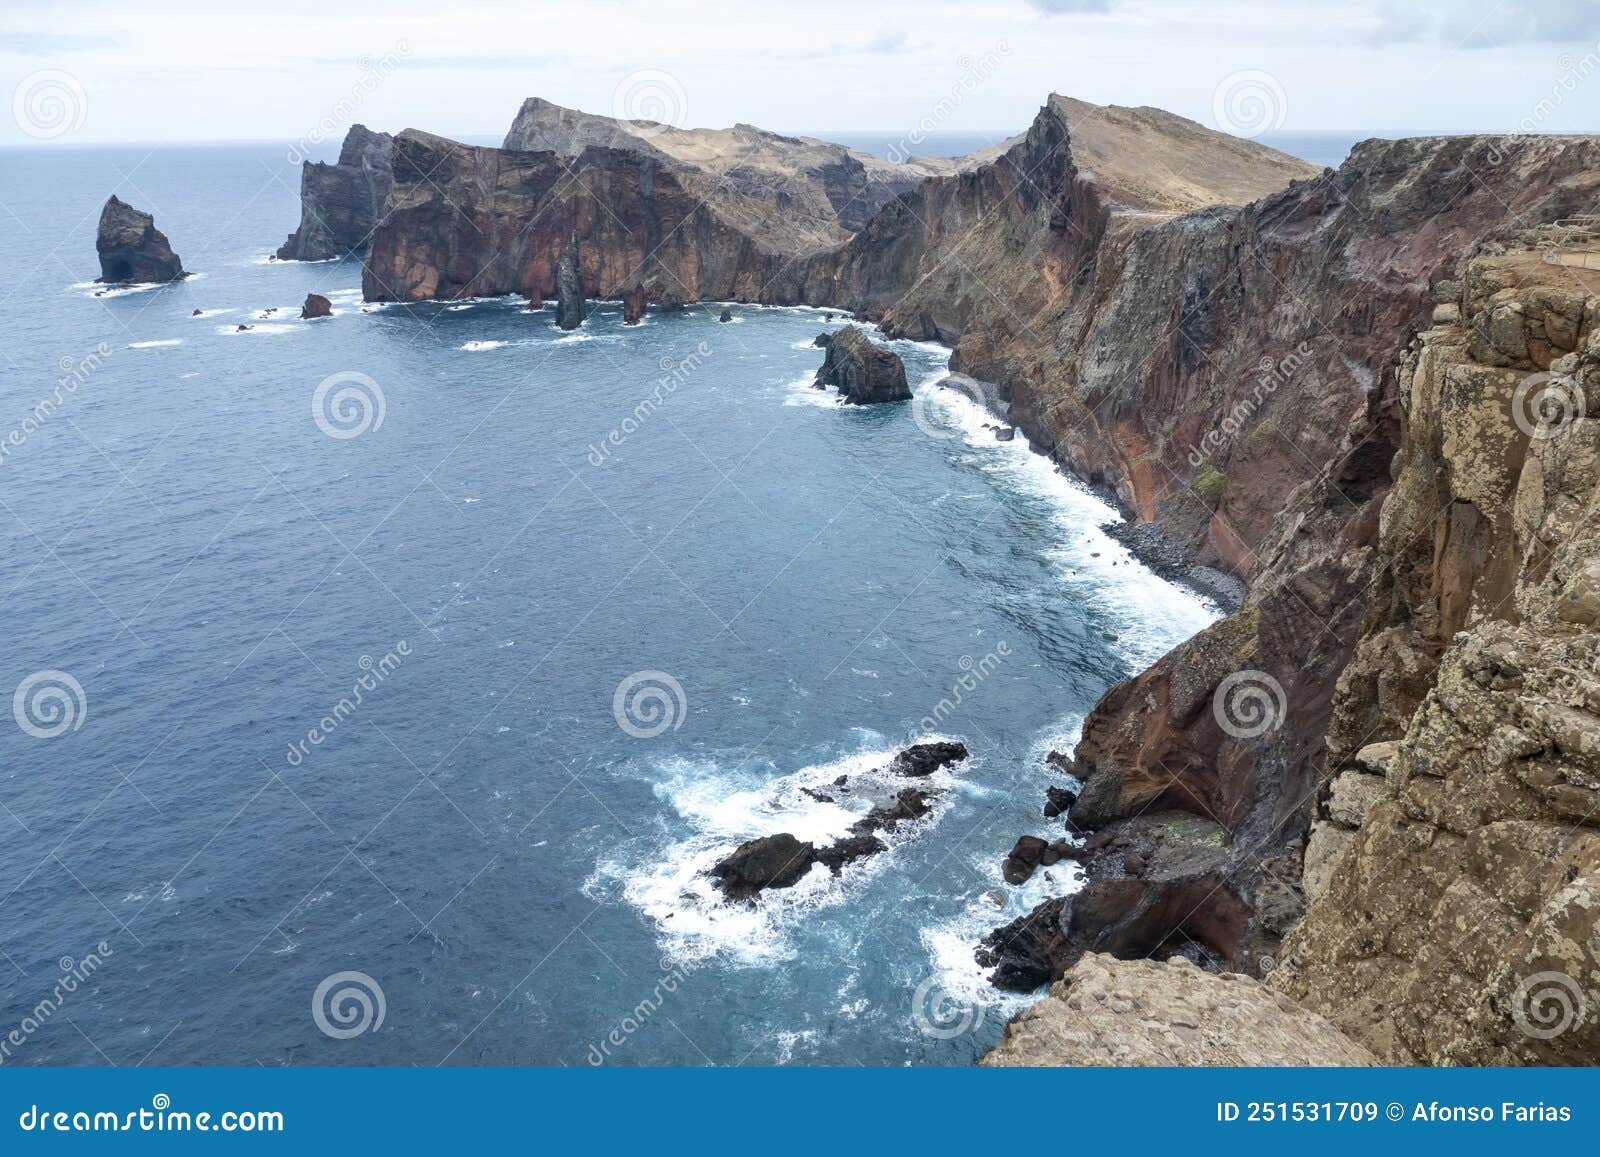 view from miradouro da ponta do rosto viewpoint, one of the best spots on madeira island.